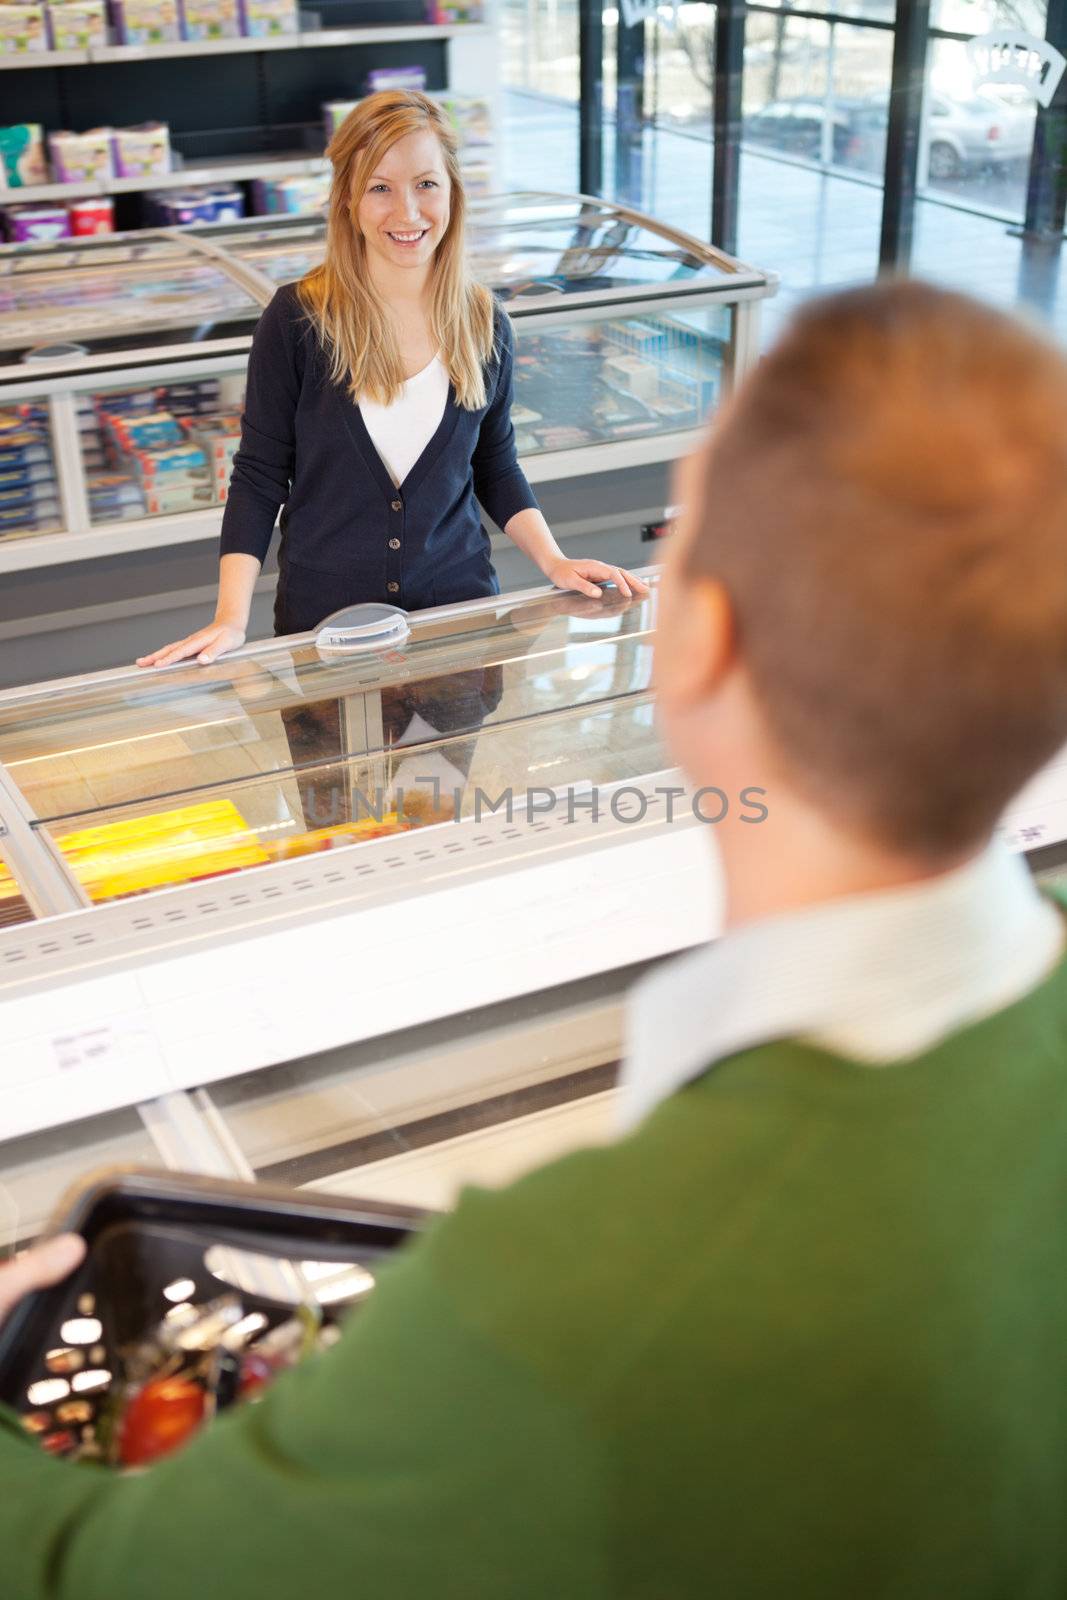 A woman flirting with a man in a grocery store